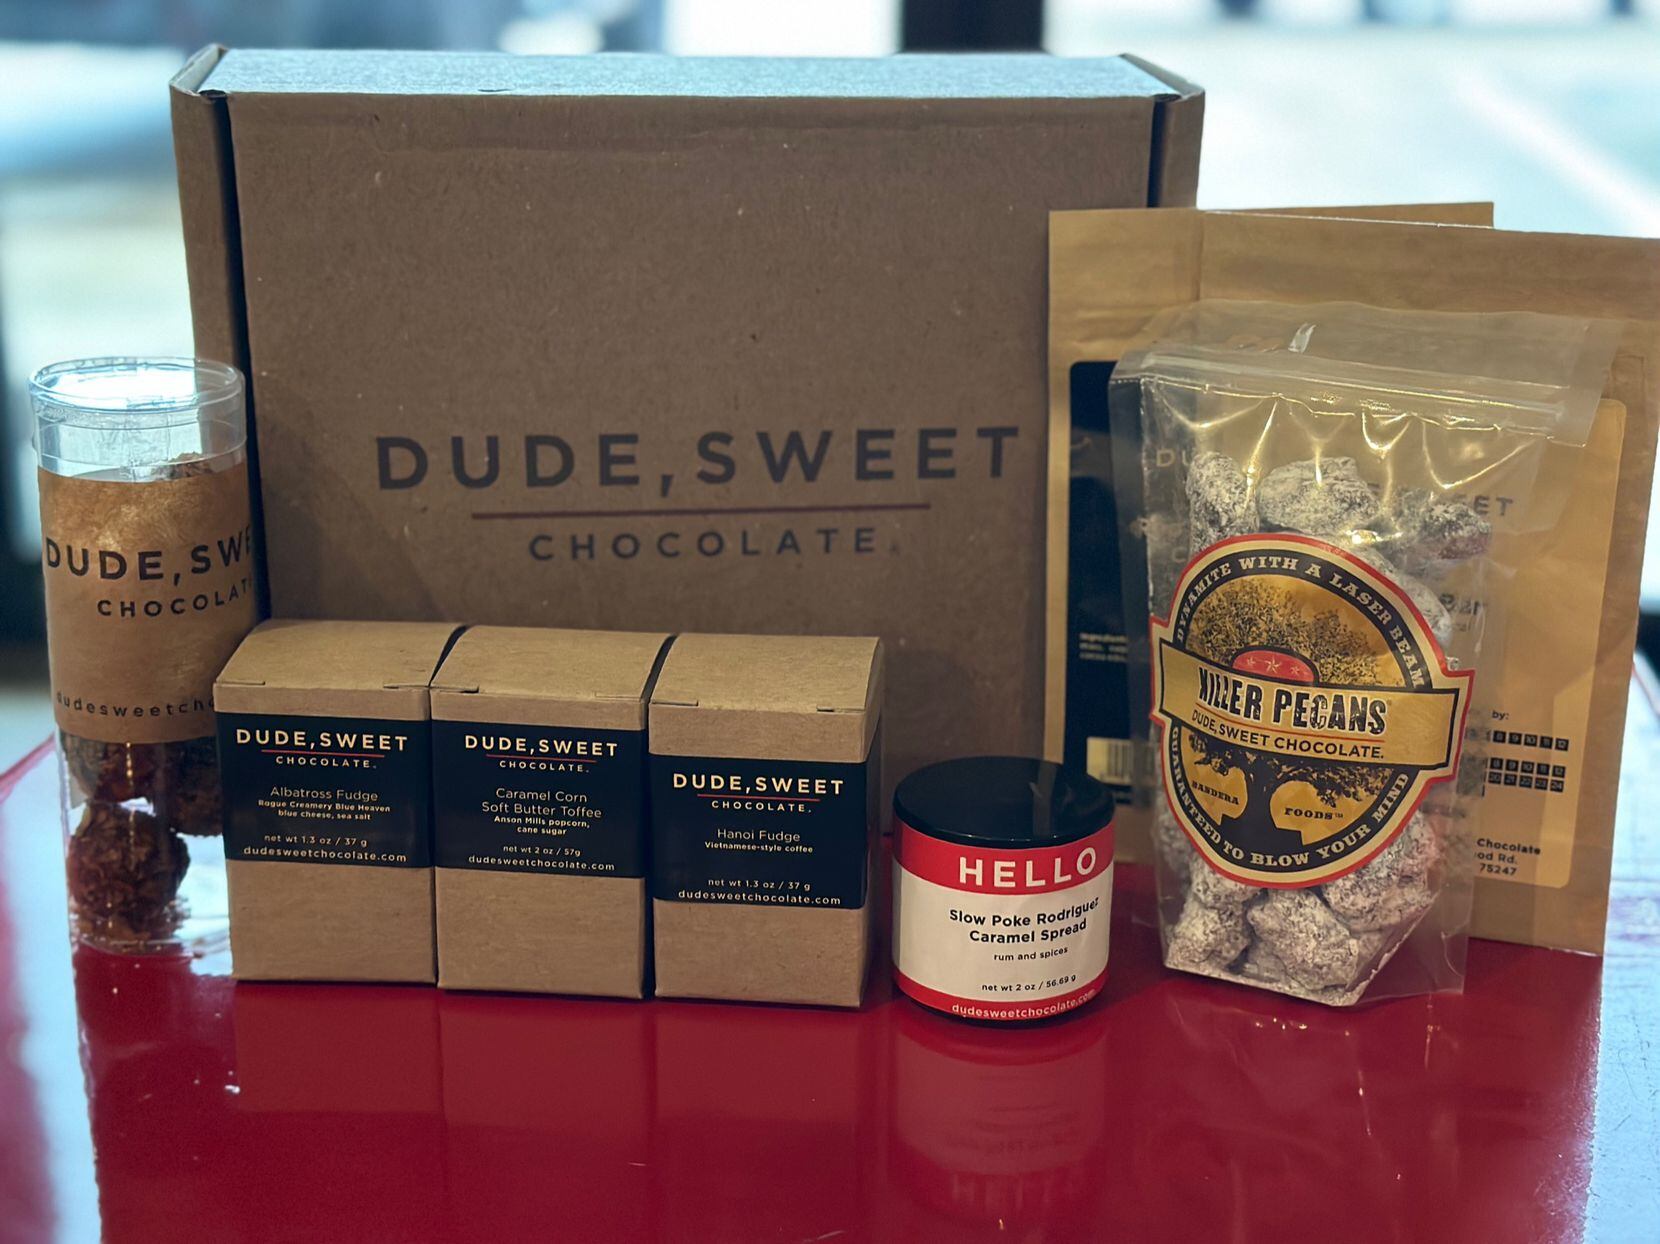 Dude, Sweet Chocolate offers a variety of gift boxes for the holidays.